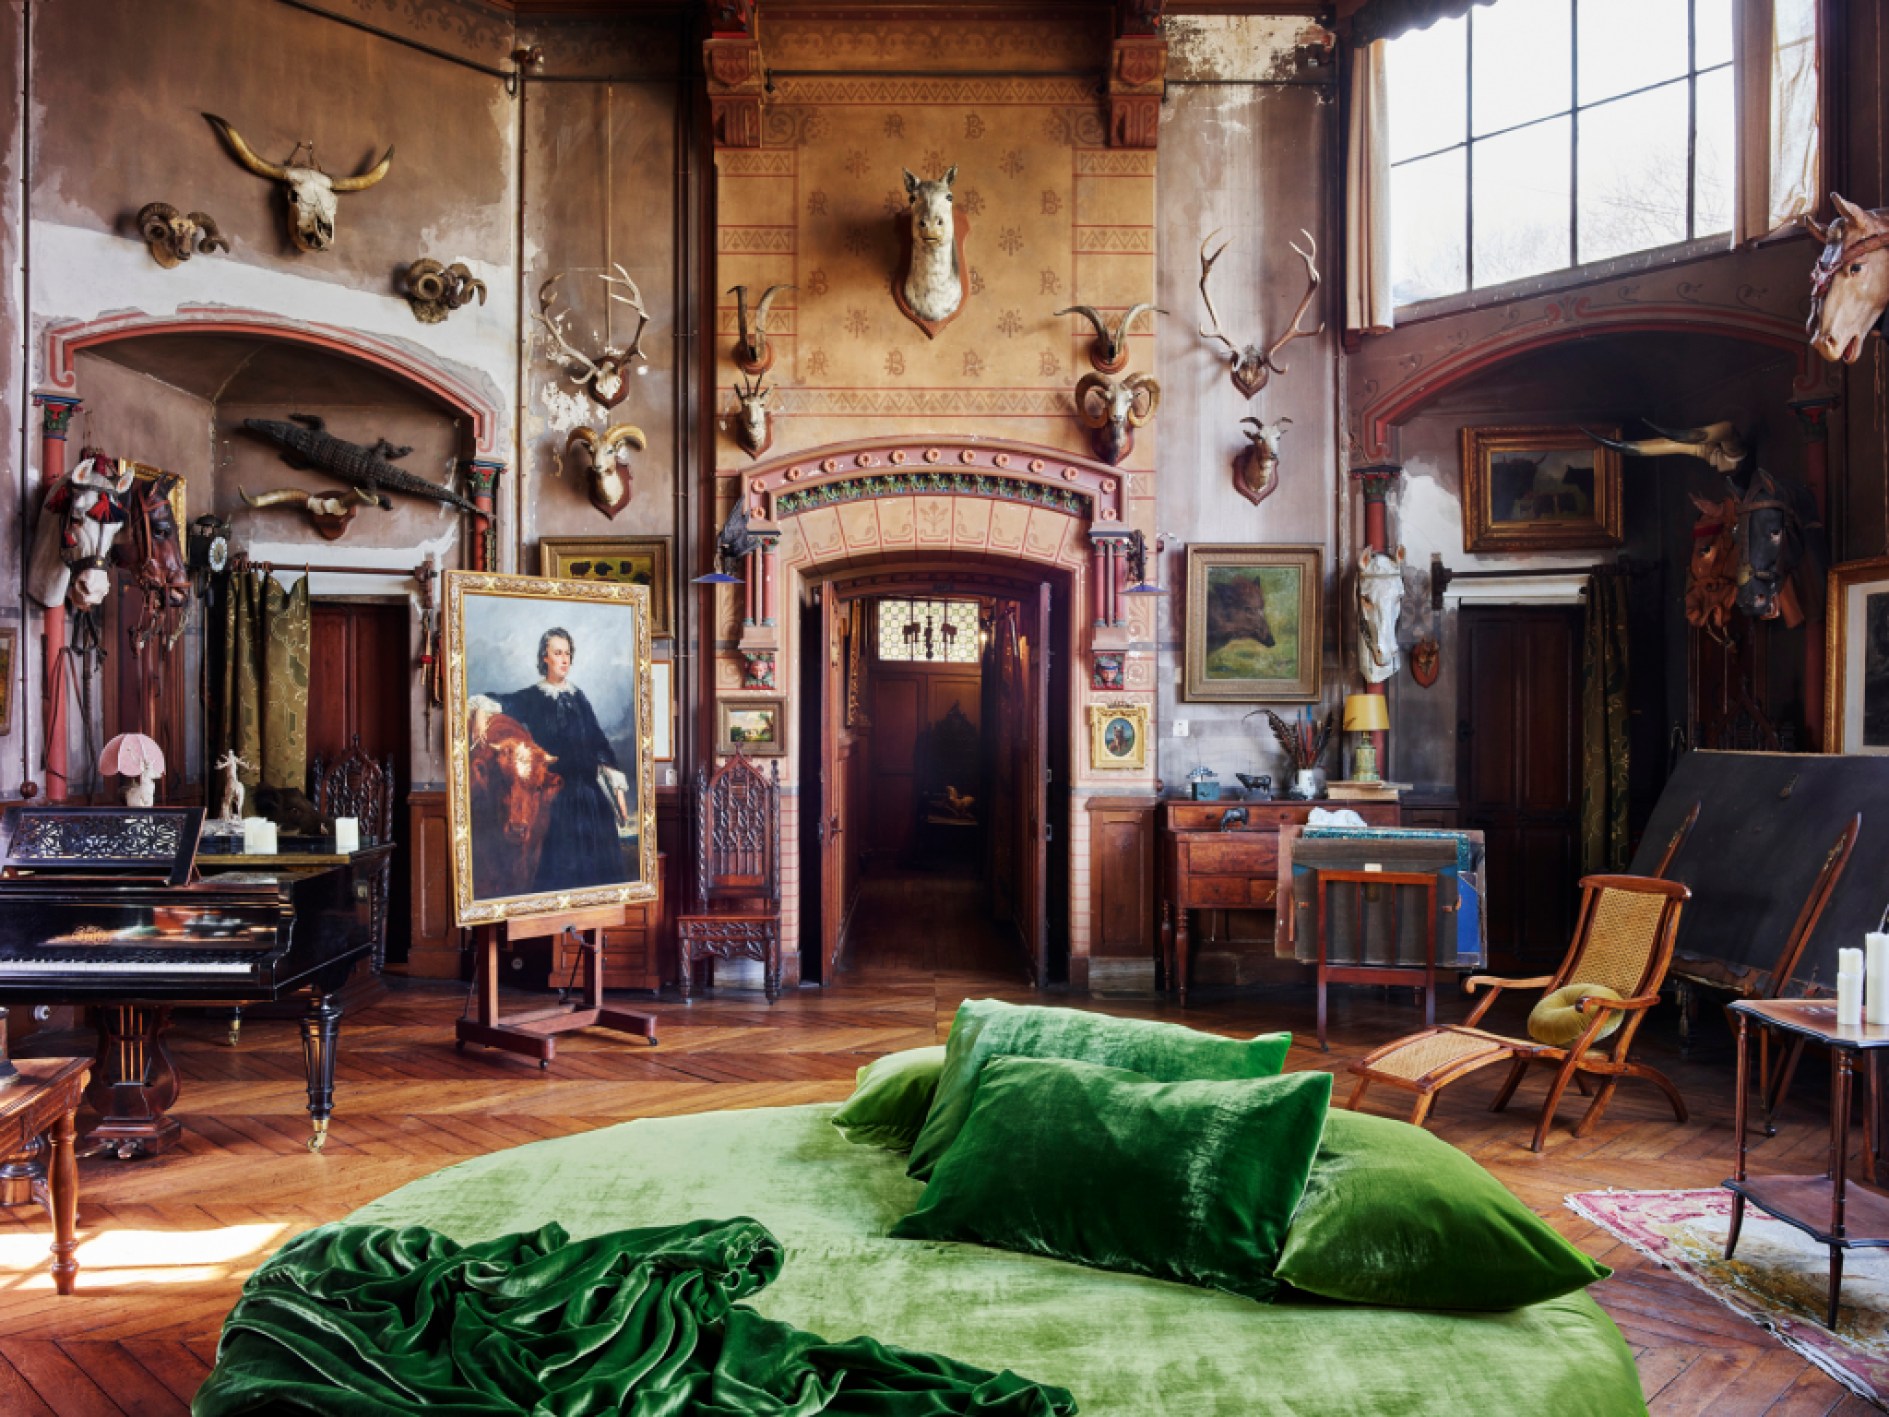 Bonheur's vast studio, dominated by bric-a-brac and objects collected by the artist during her lifetime.